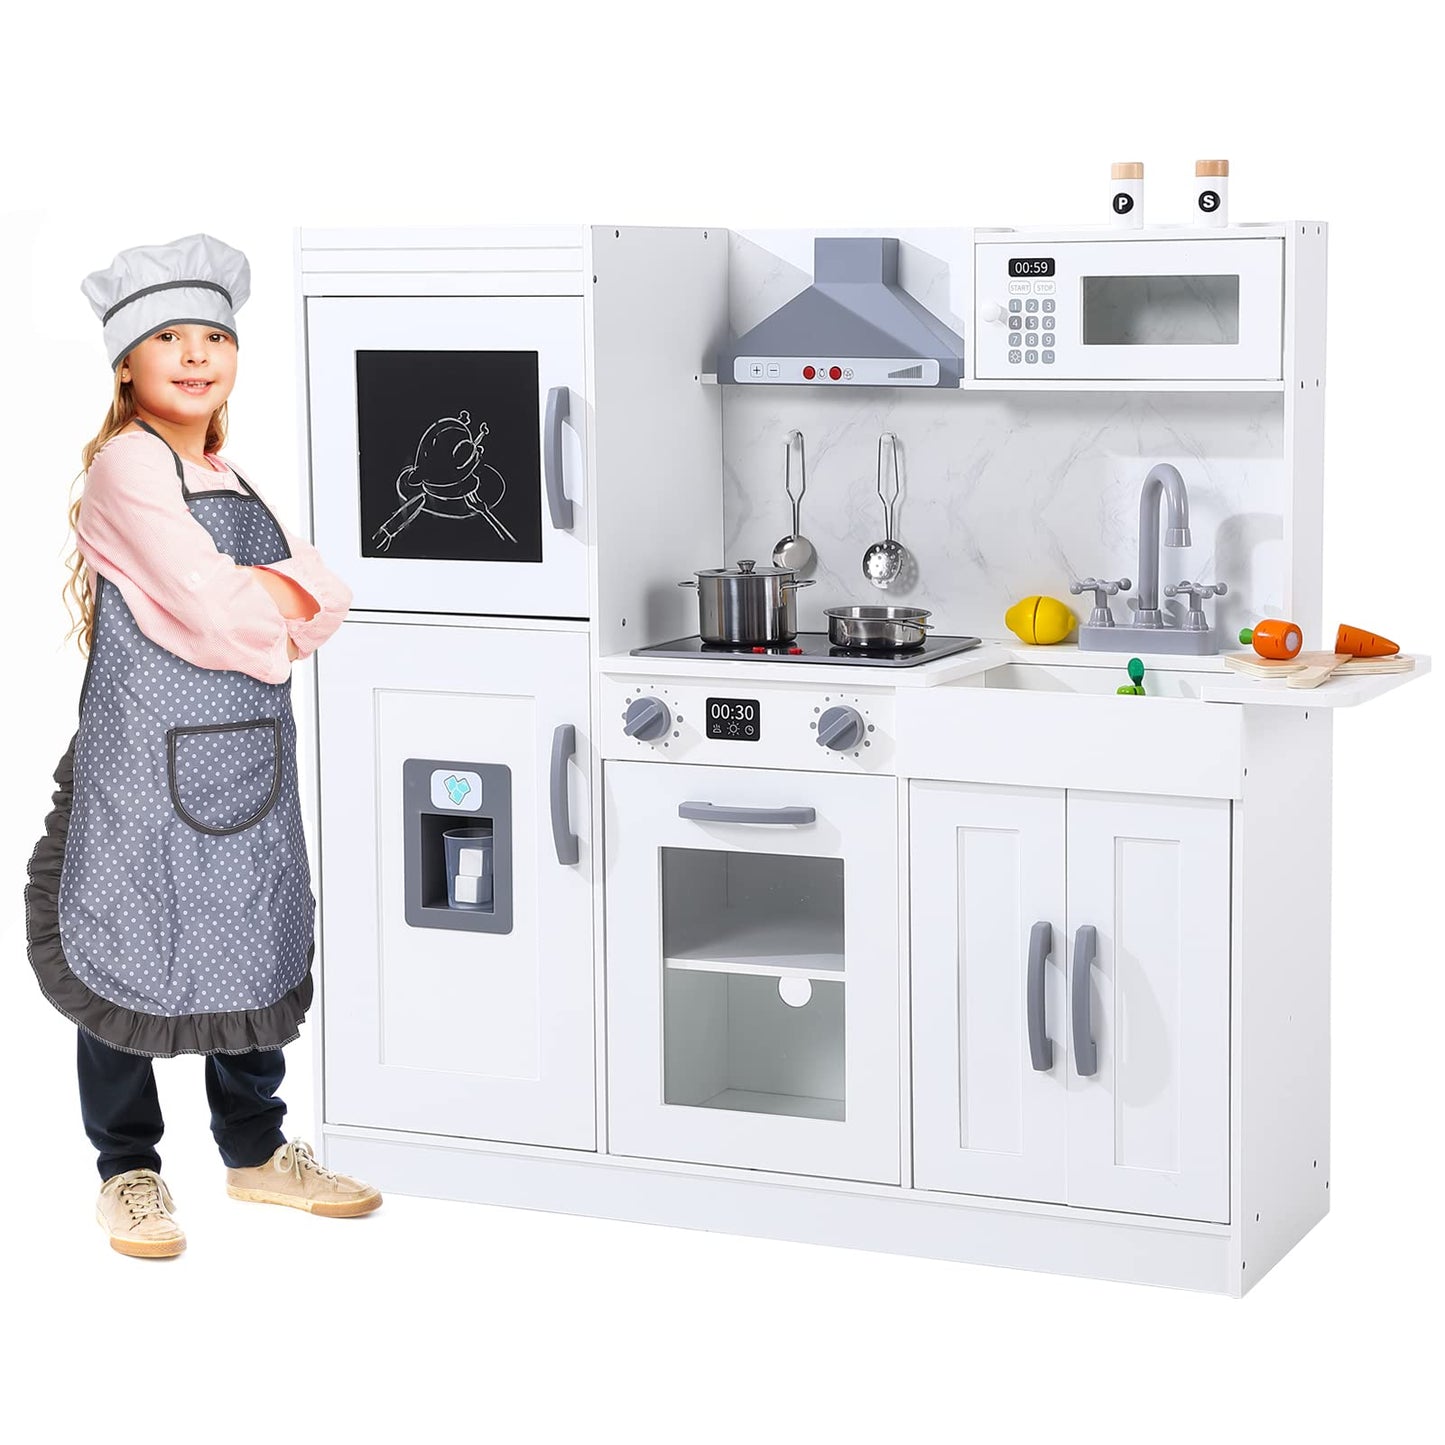 Kids Kitchen Playset, Wooden Chef Pretend Play Set with 20 PCS Cookware Accessories, Wooden Cookware Pretend with Ice Maker, Microwave, Oven, Range Hood, Sink, Real Lights & Sounds拢卢Gray